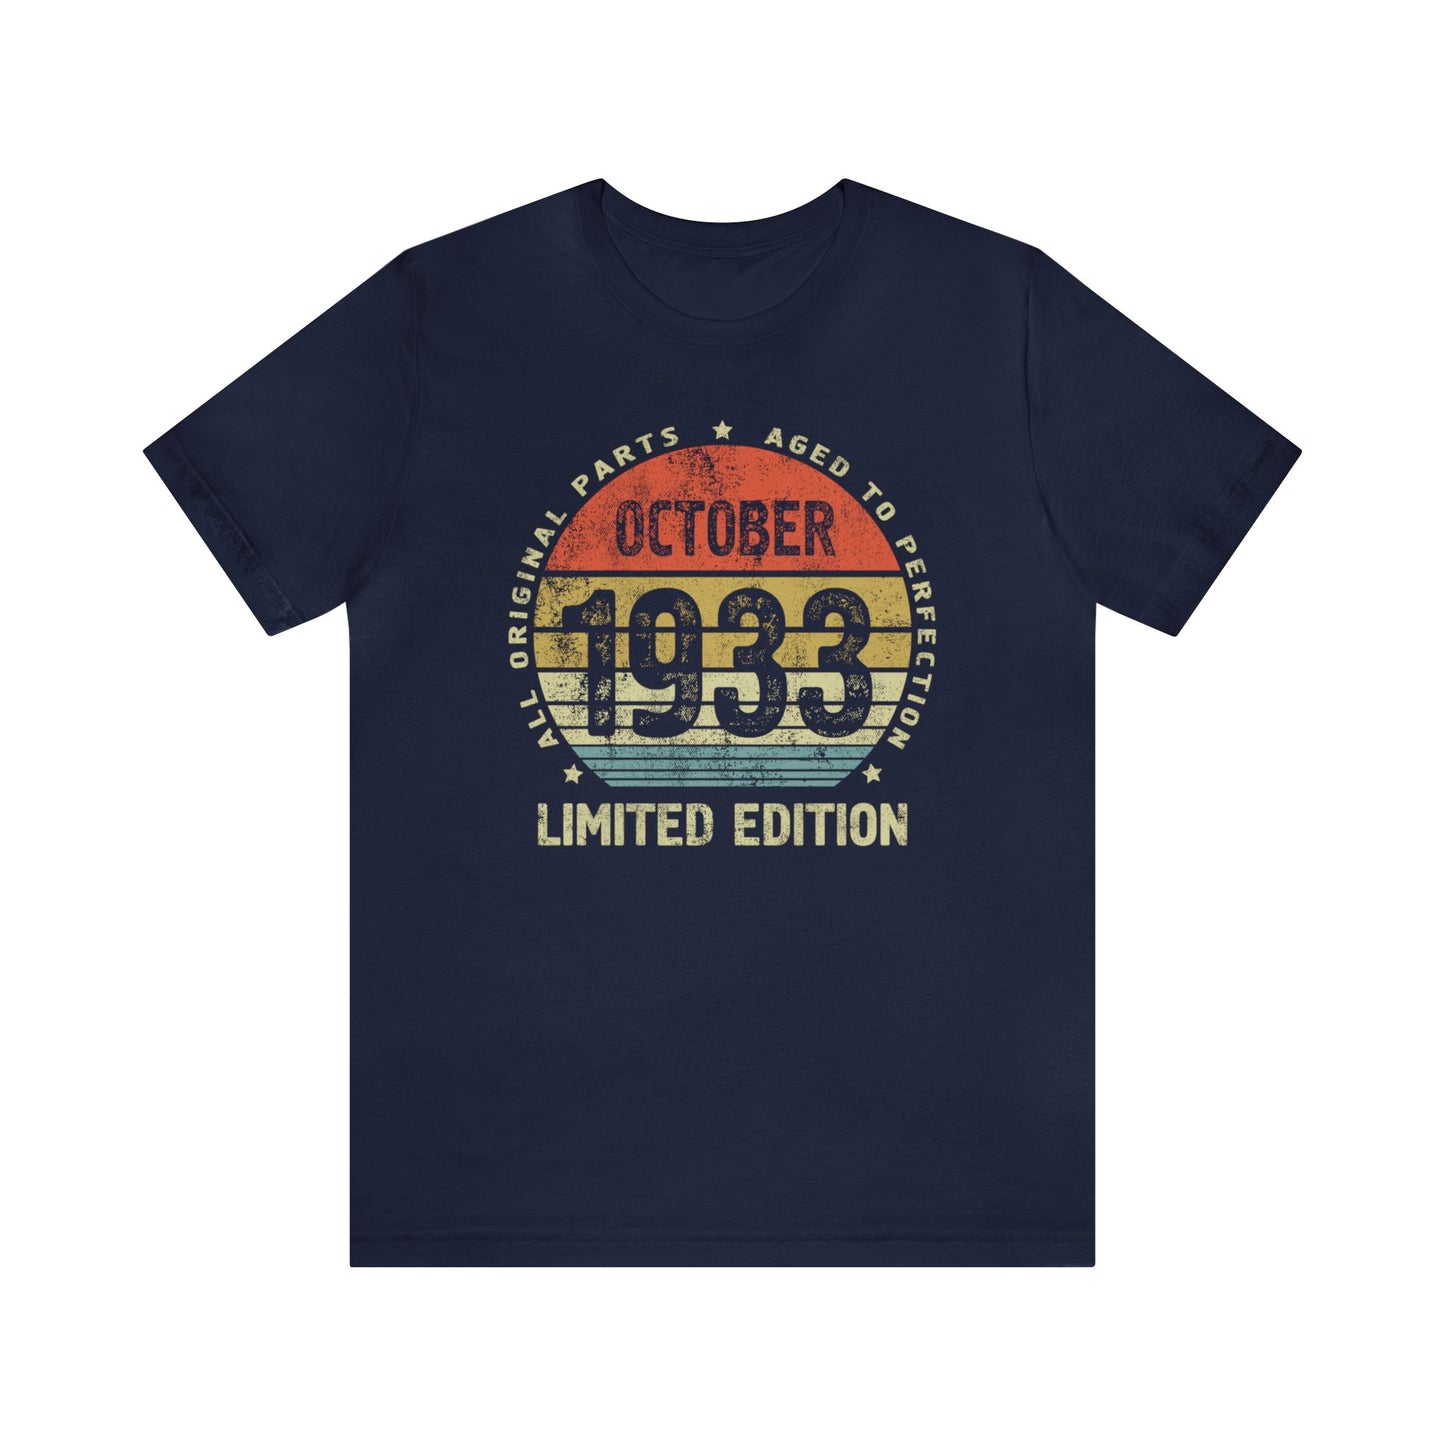 90th birthday shirt for men or women October 1933 birthday gift for wife or husband